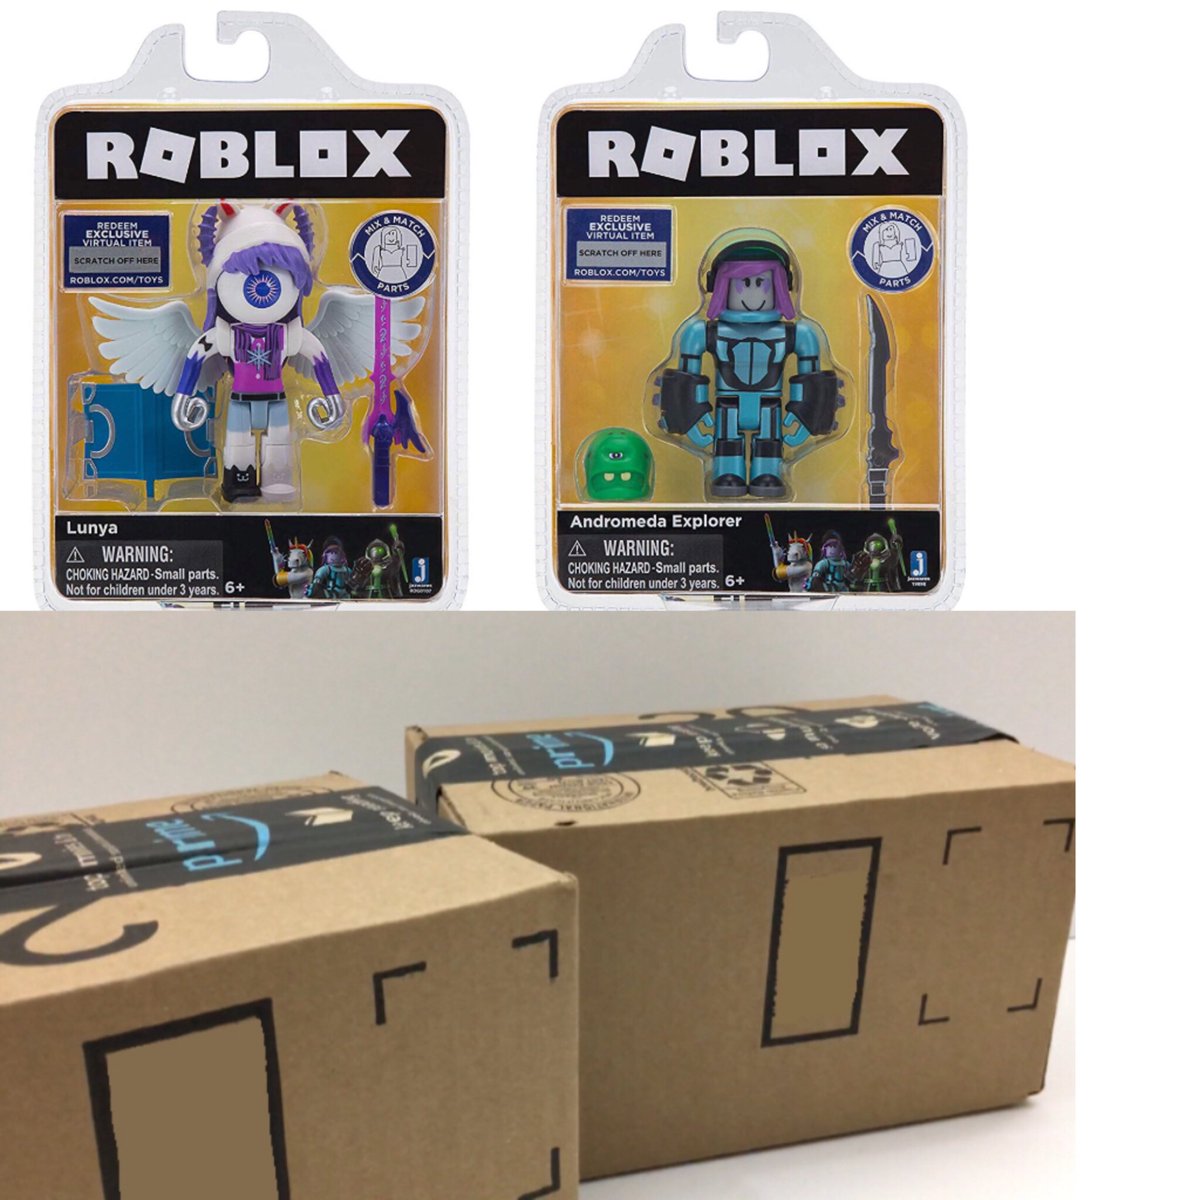 Lilyandgia Just Got These Two Core Packs In The Mail - andromeda explorer roblox